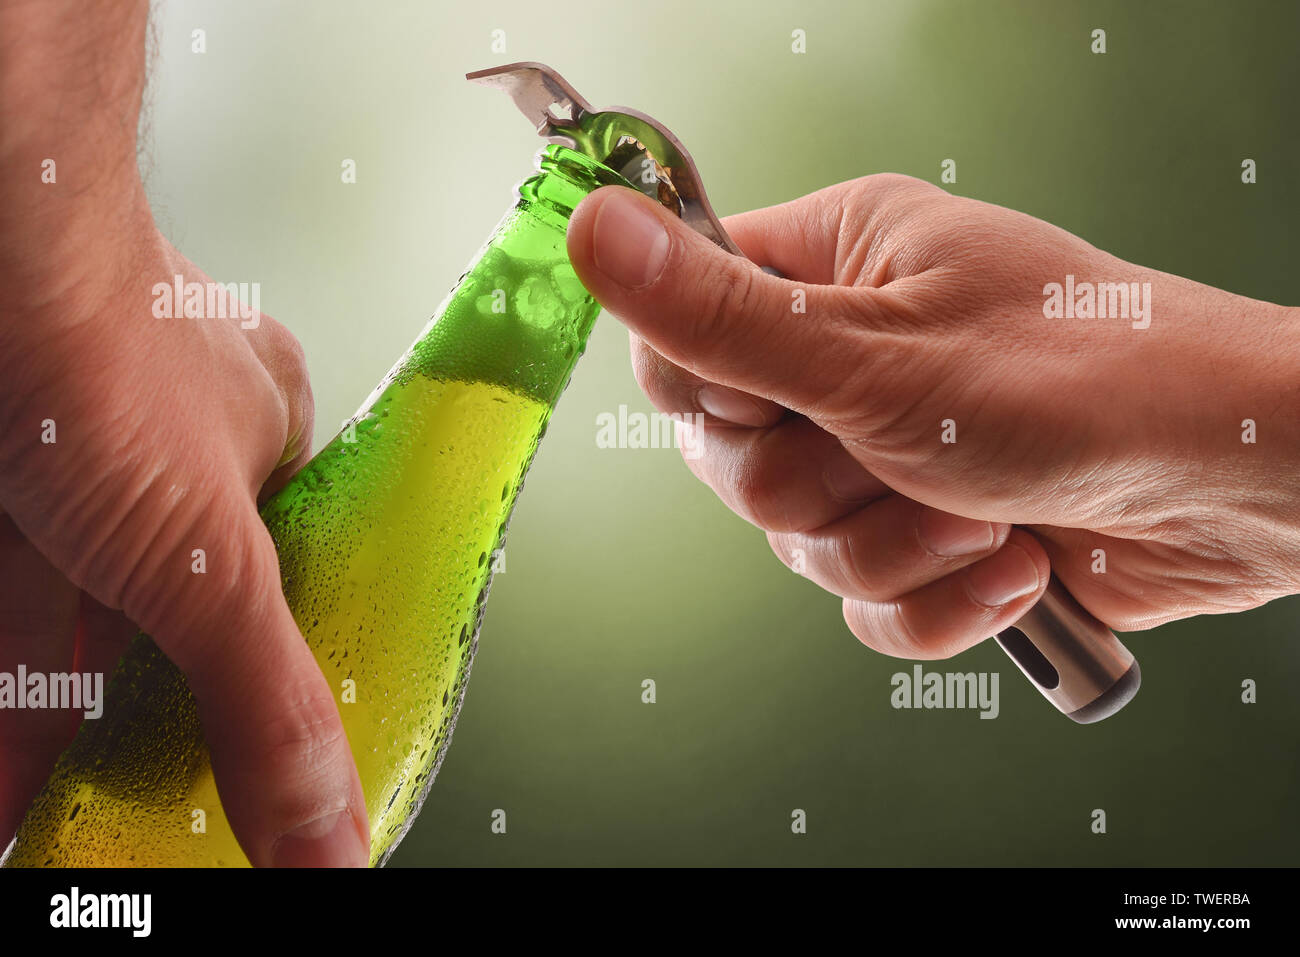 opening a green glass bottle with a metal bottle opener and green background.  Horizontal composition. Front view. Stock Photo